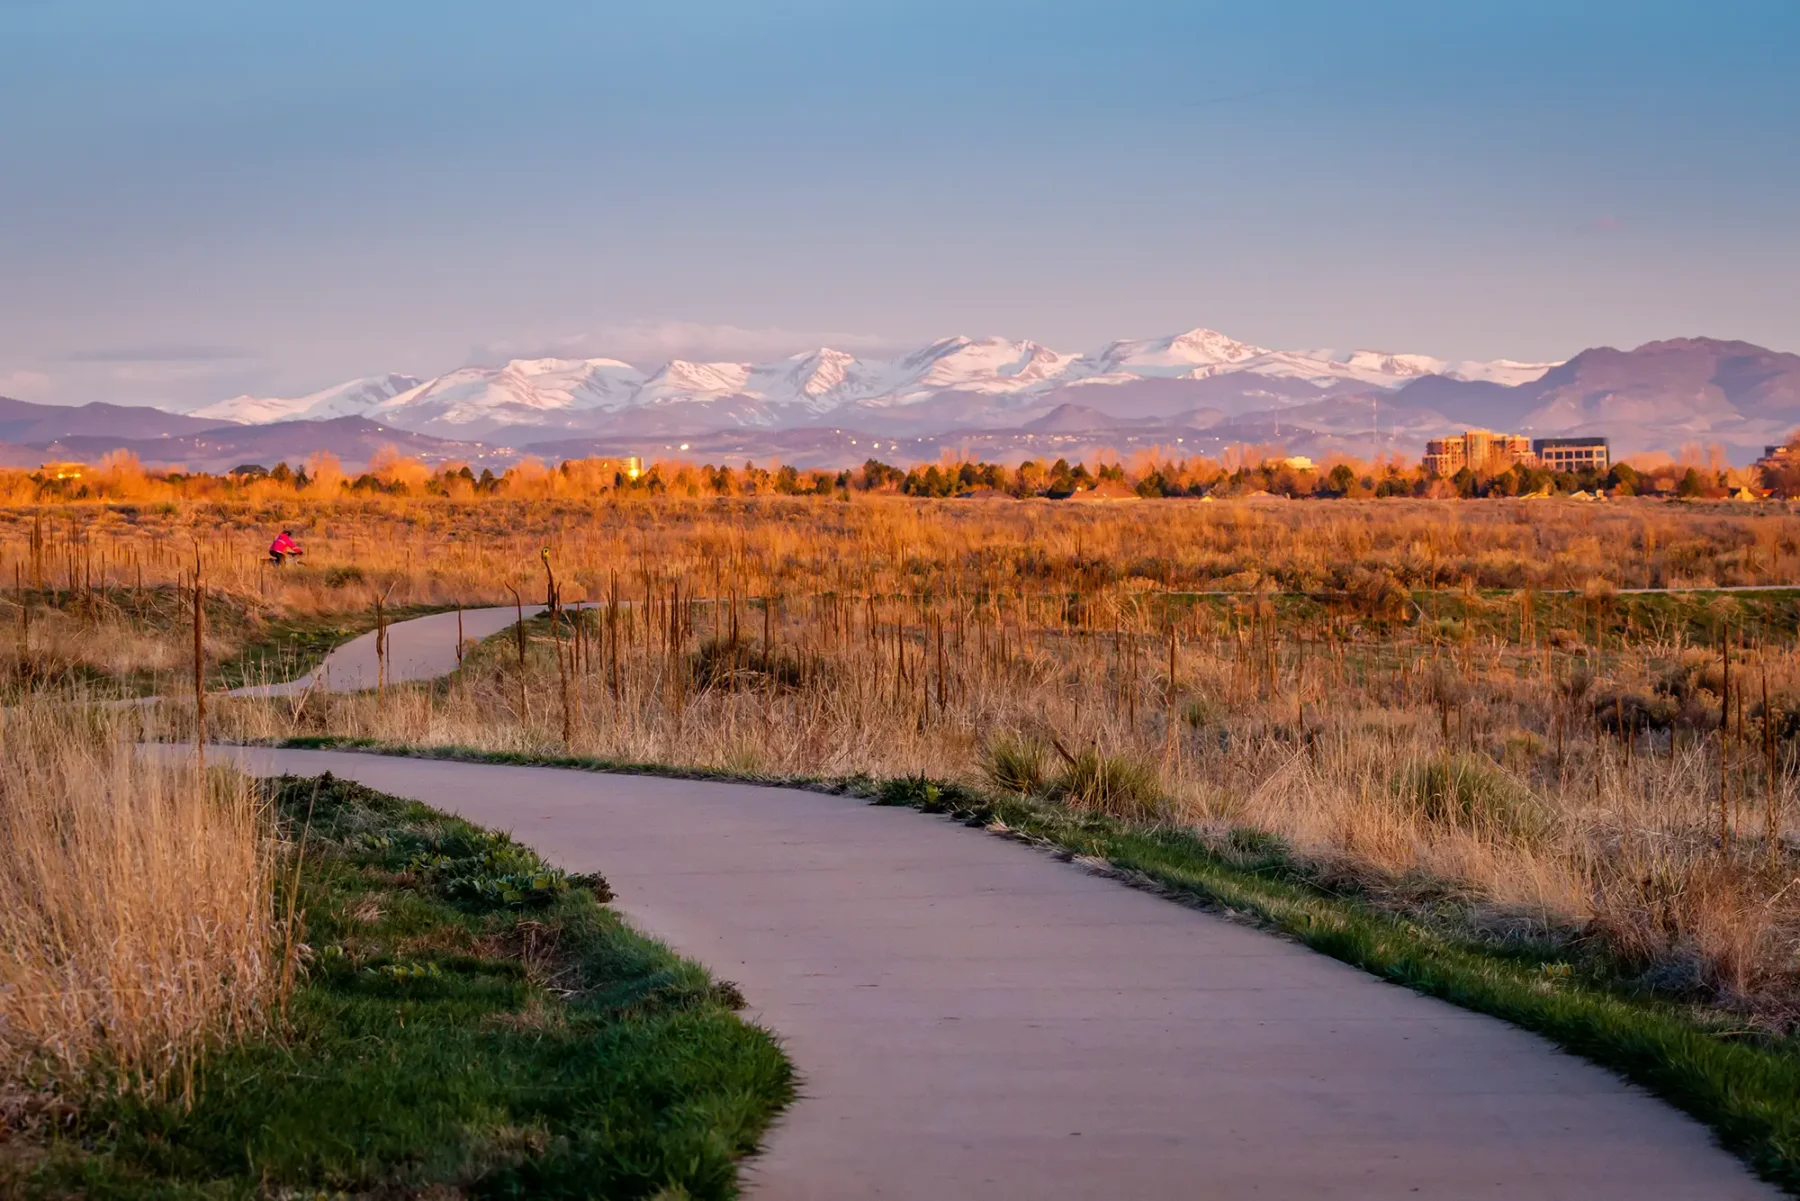 Winding road in a prairie landscape with mountains in the distance